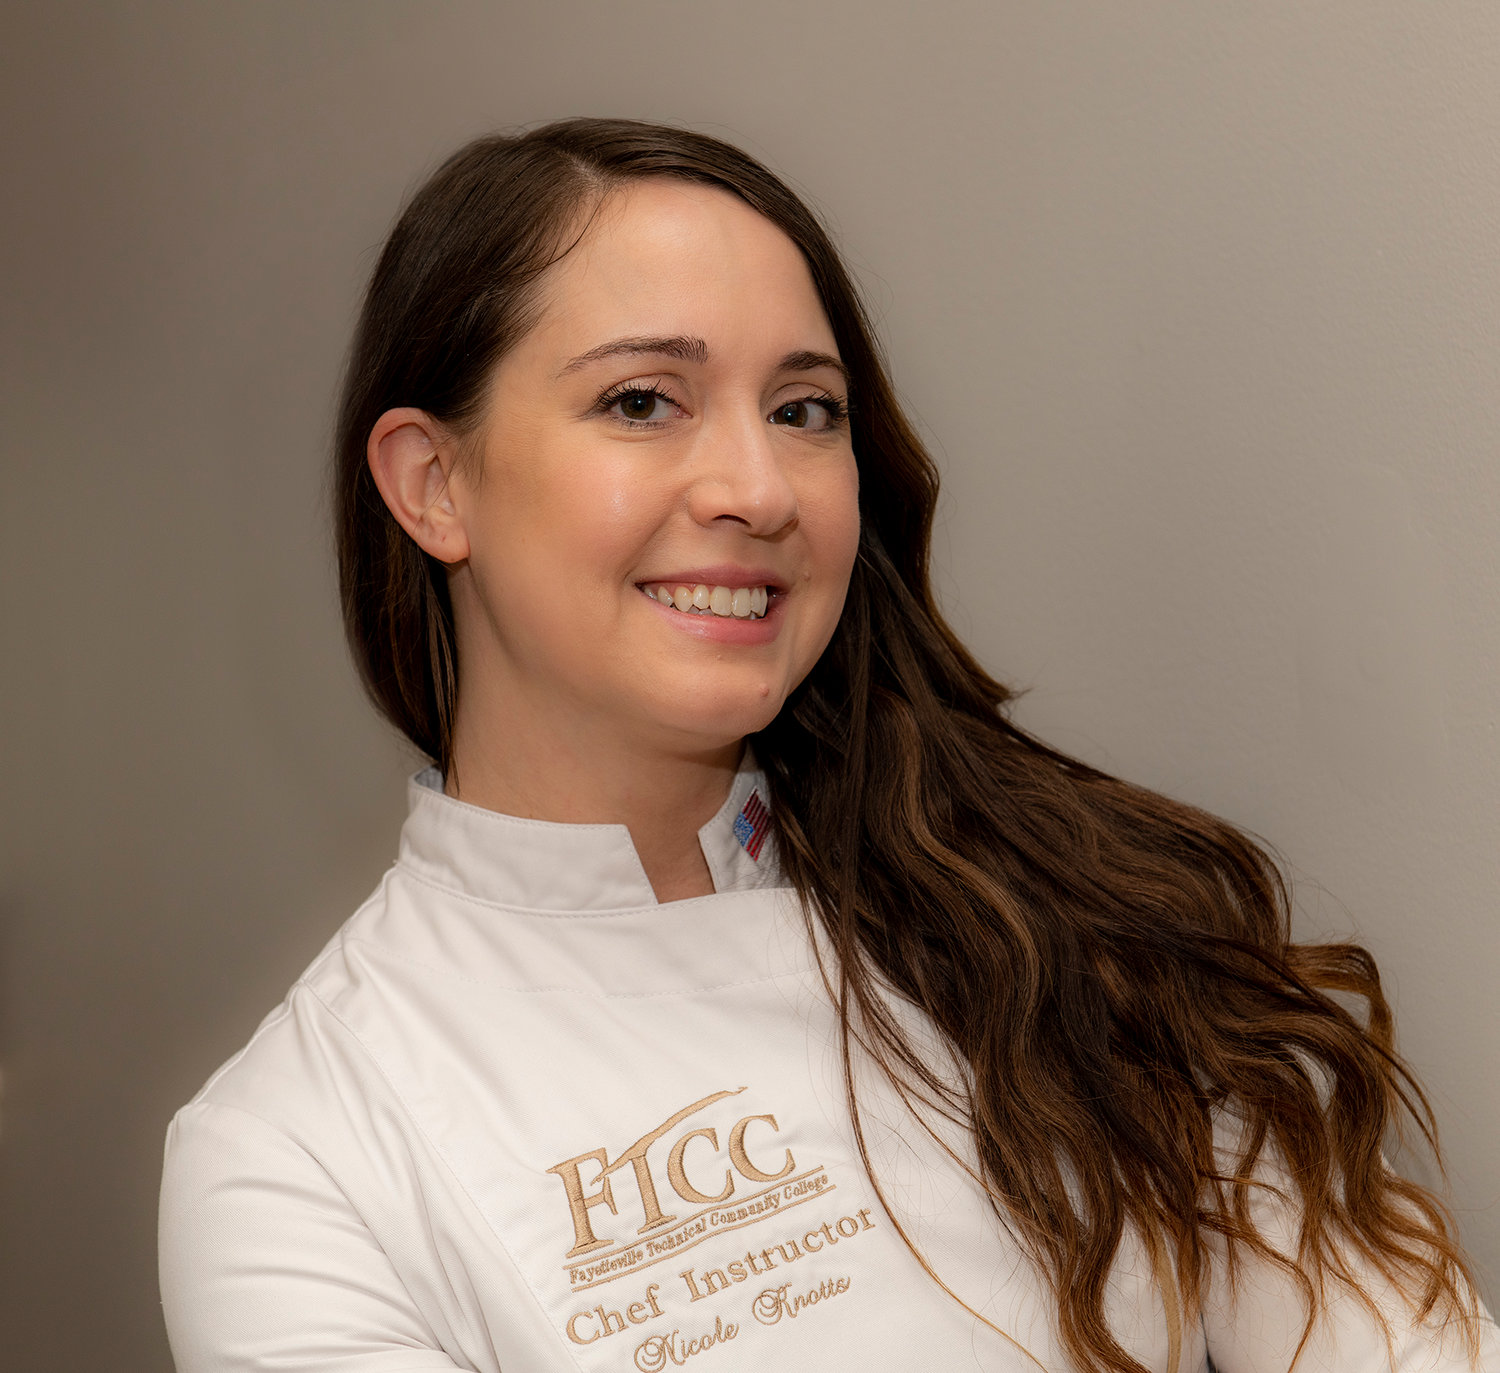 Nicole Knotts, FTCC’s coordinator of culinary instructional events